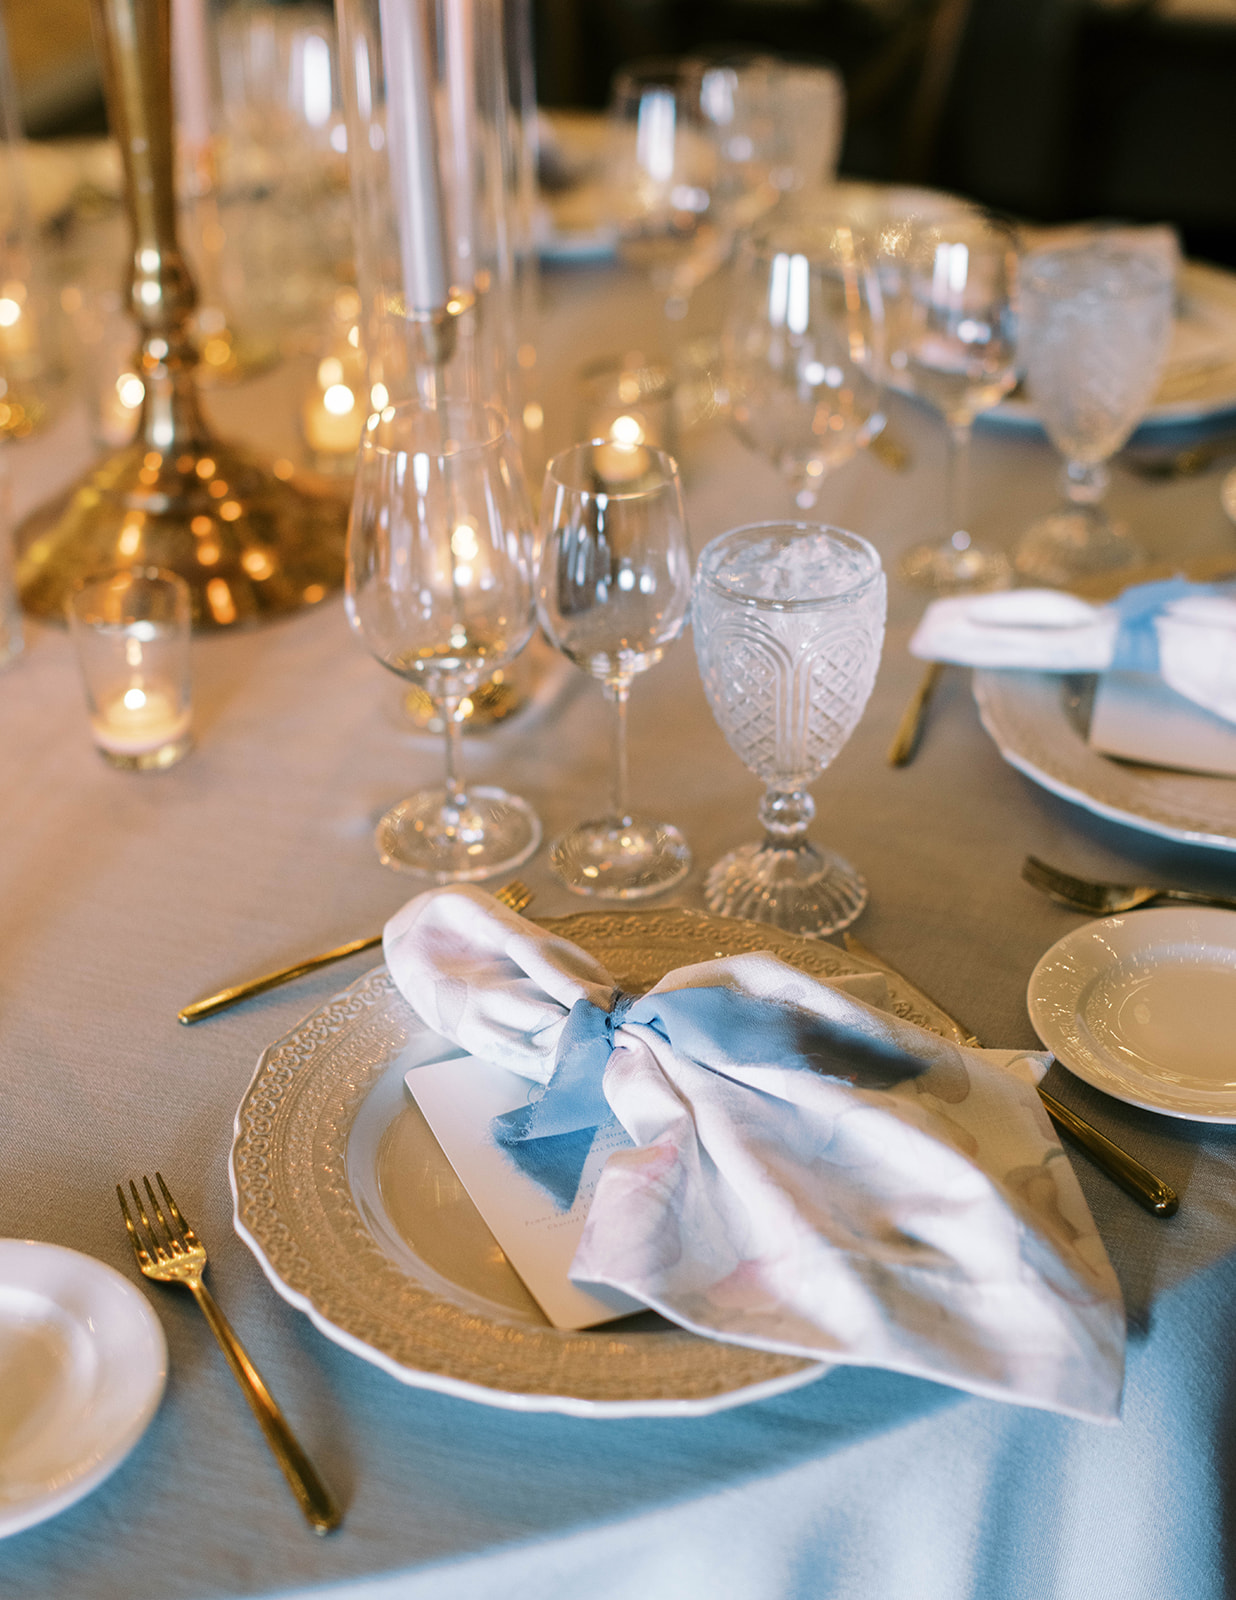 place setting with blue tablecloths for a garden theme wedding at montage deer valley resort in park city utah. photo by megan robinson photography